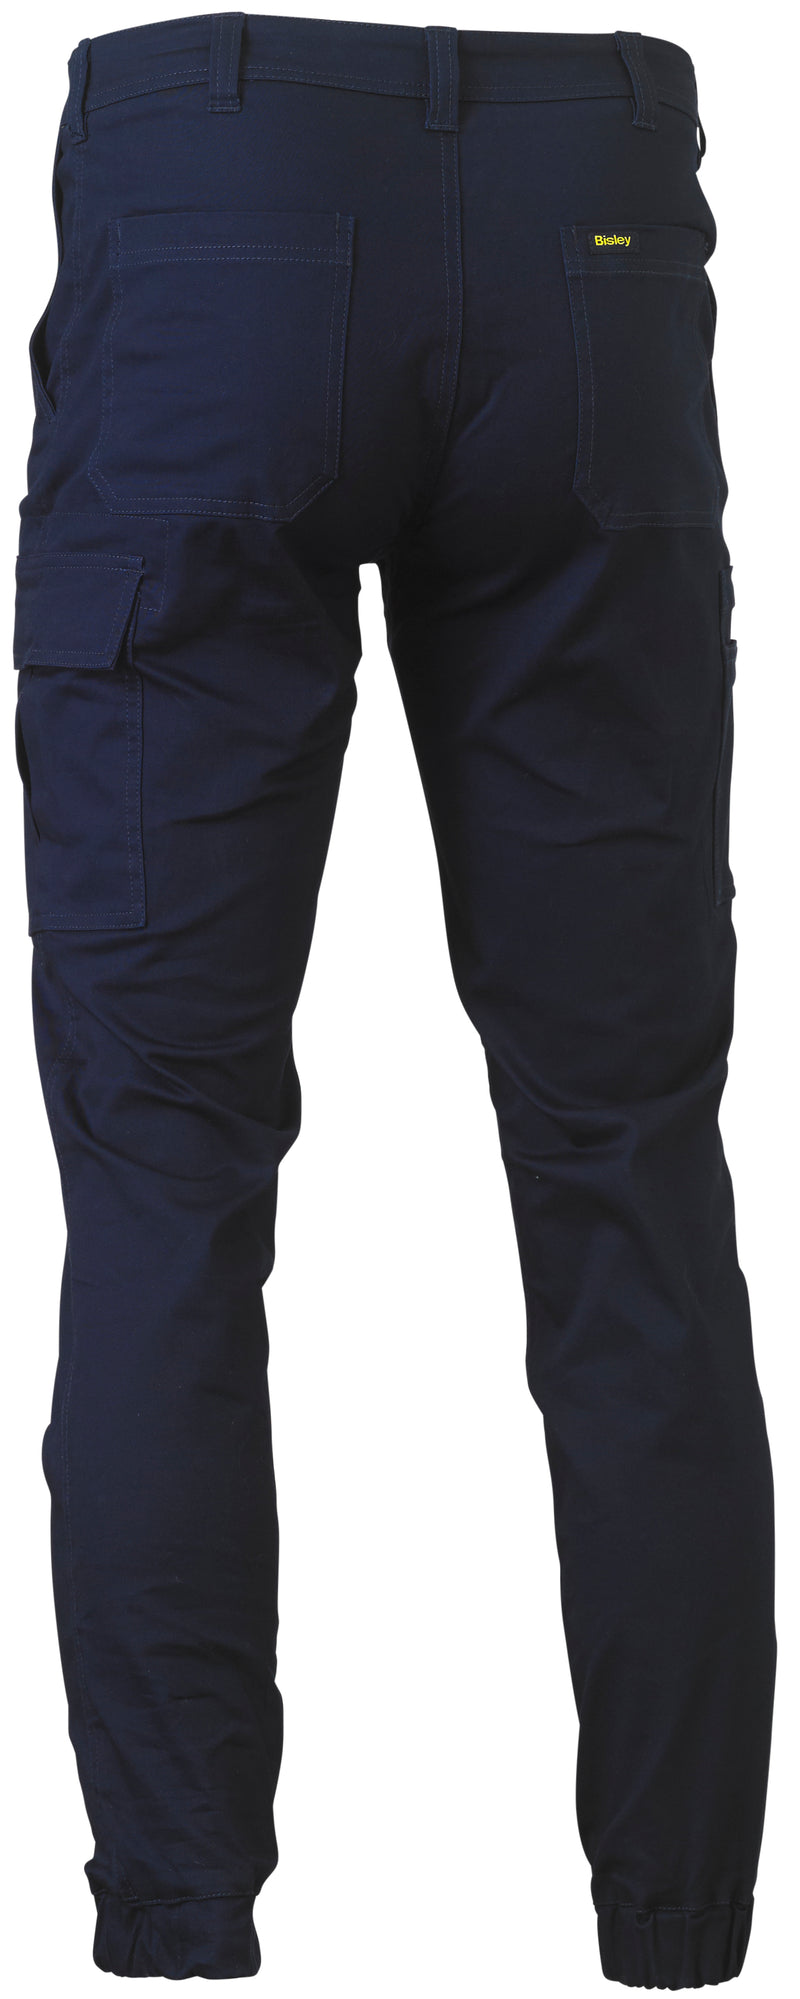 Load image into Gallery viewer, Wholesale BPC6028 Bisley Stretch Cotton Drill Cargo Cuffed Pants - Regular Printed or Blank
